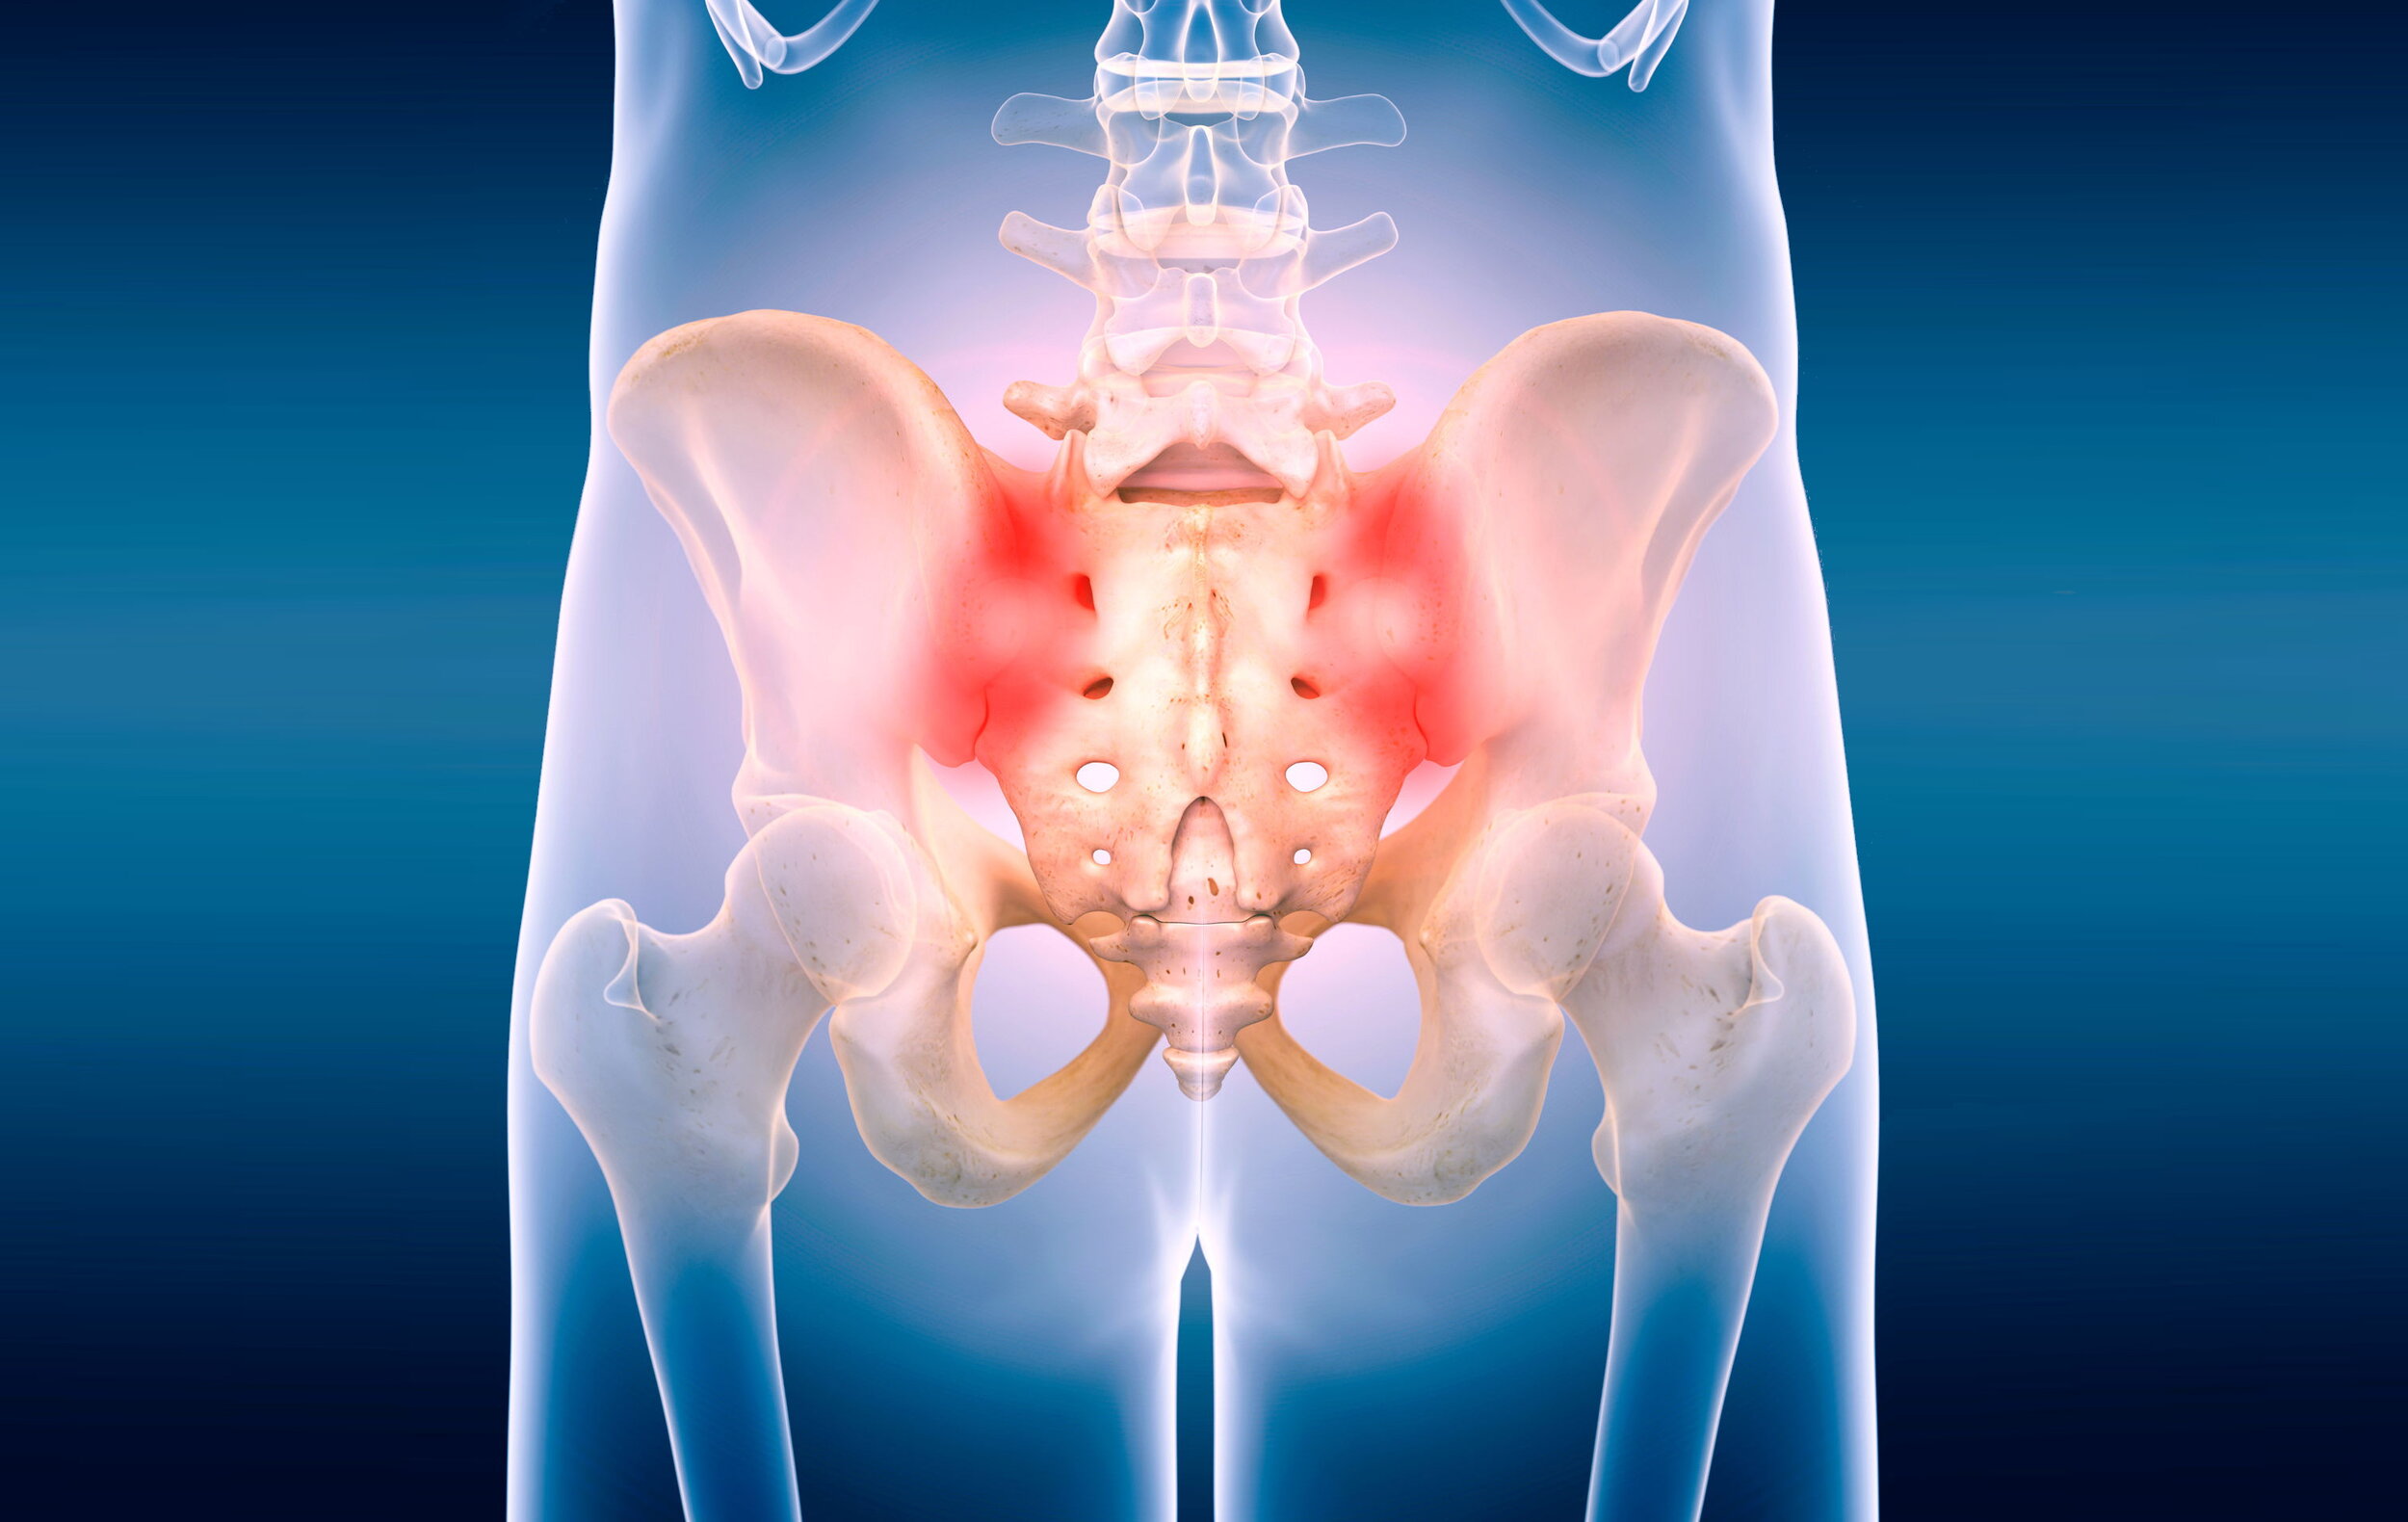 Sacroiliac (SI) Joint Injection